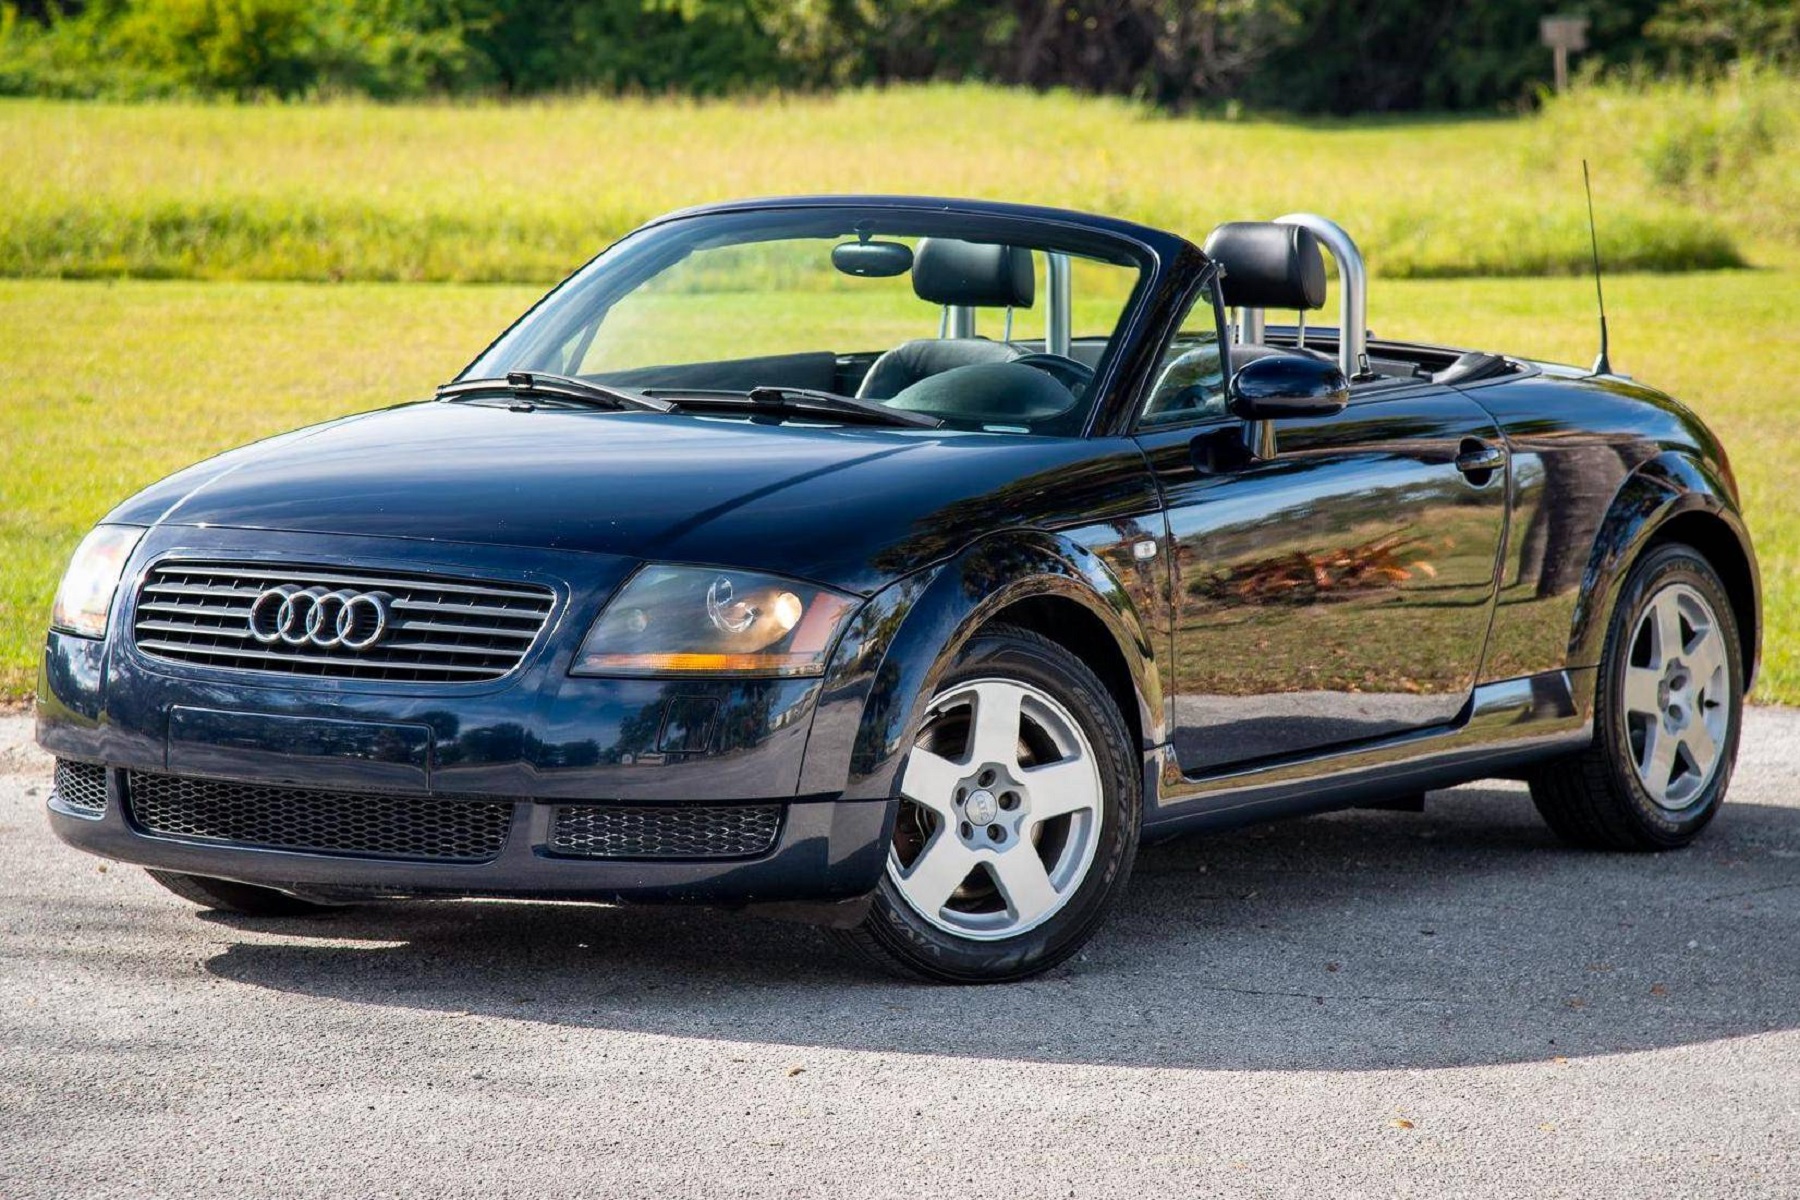 A black 2002 Audi TT Roadster with its roof down